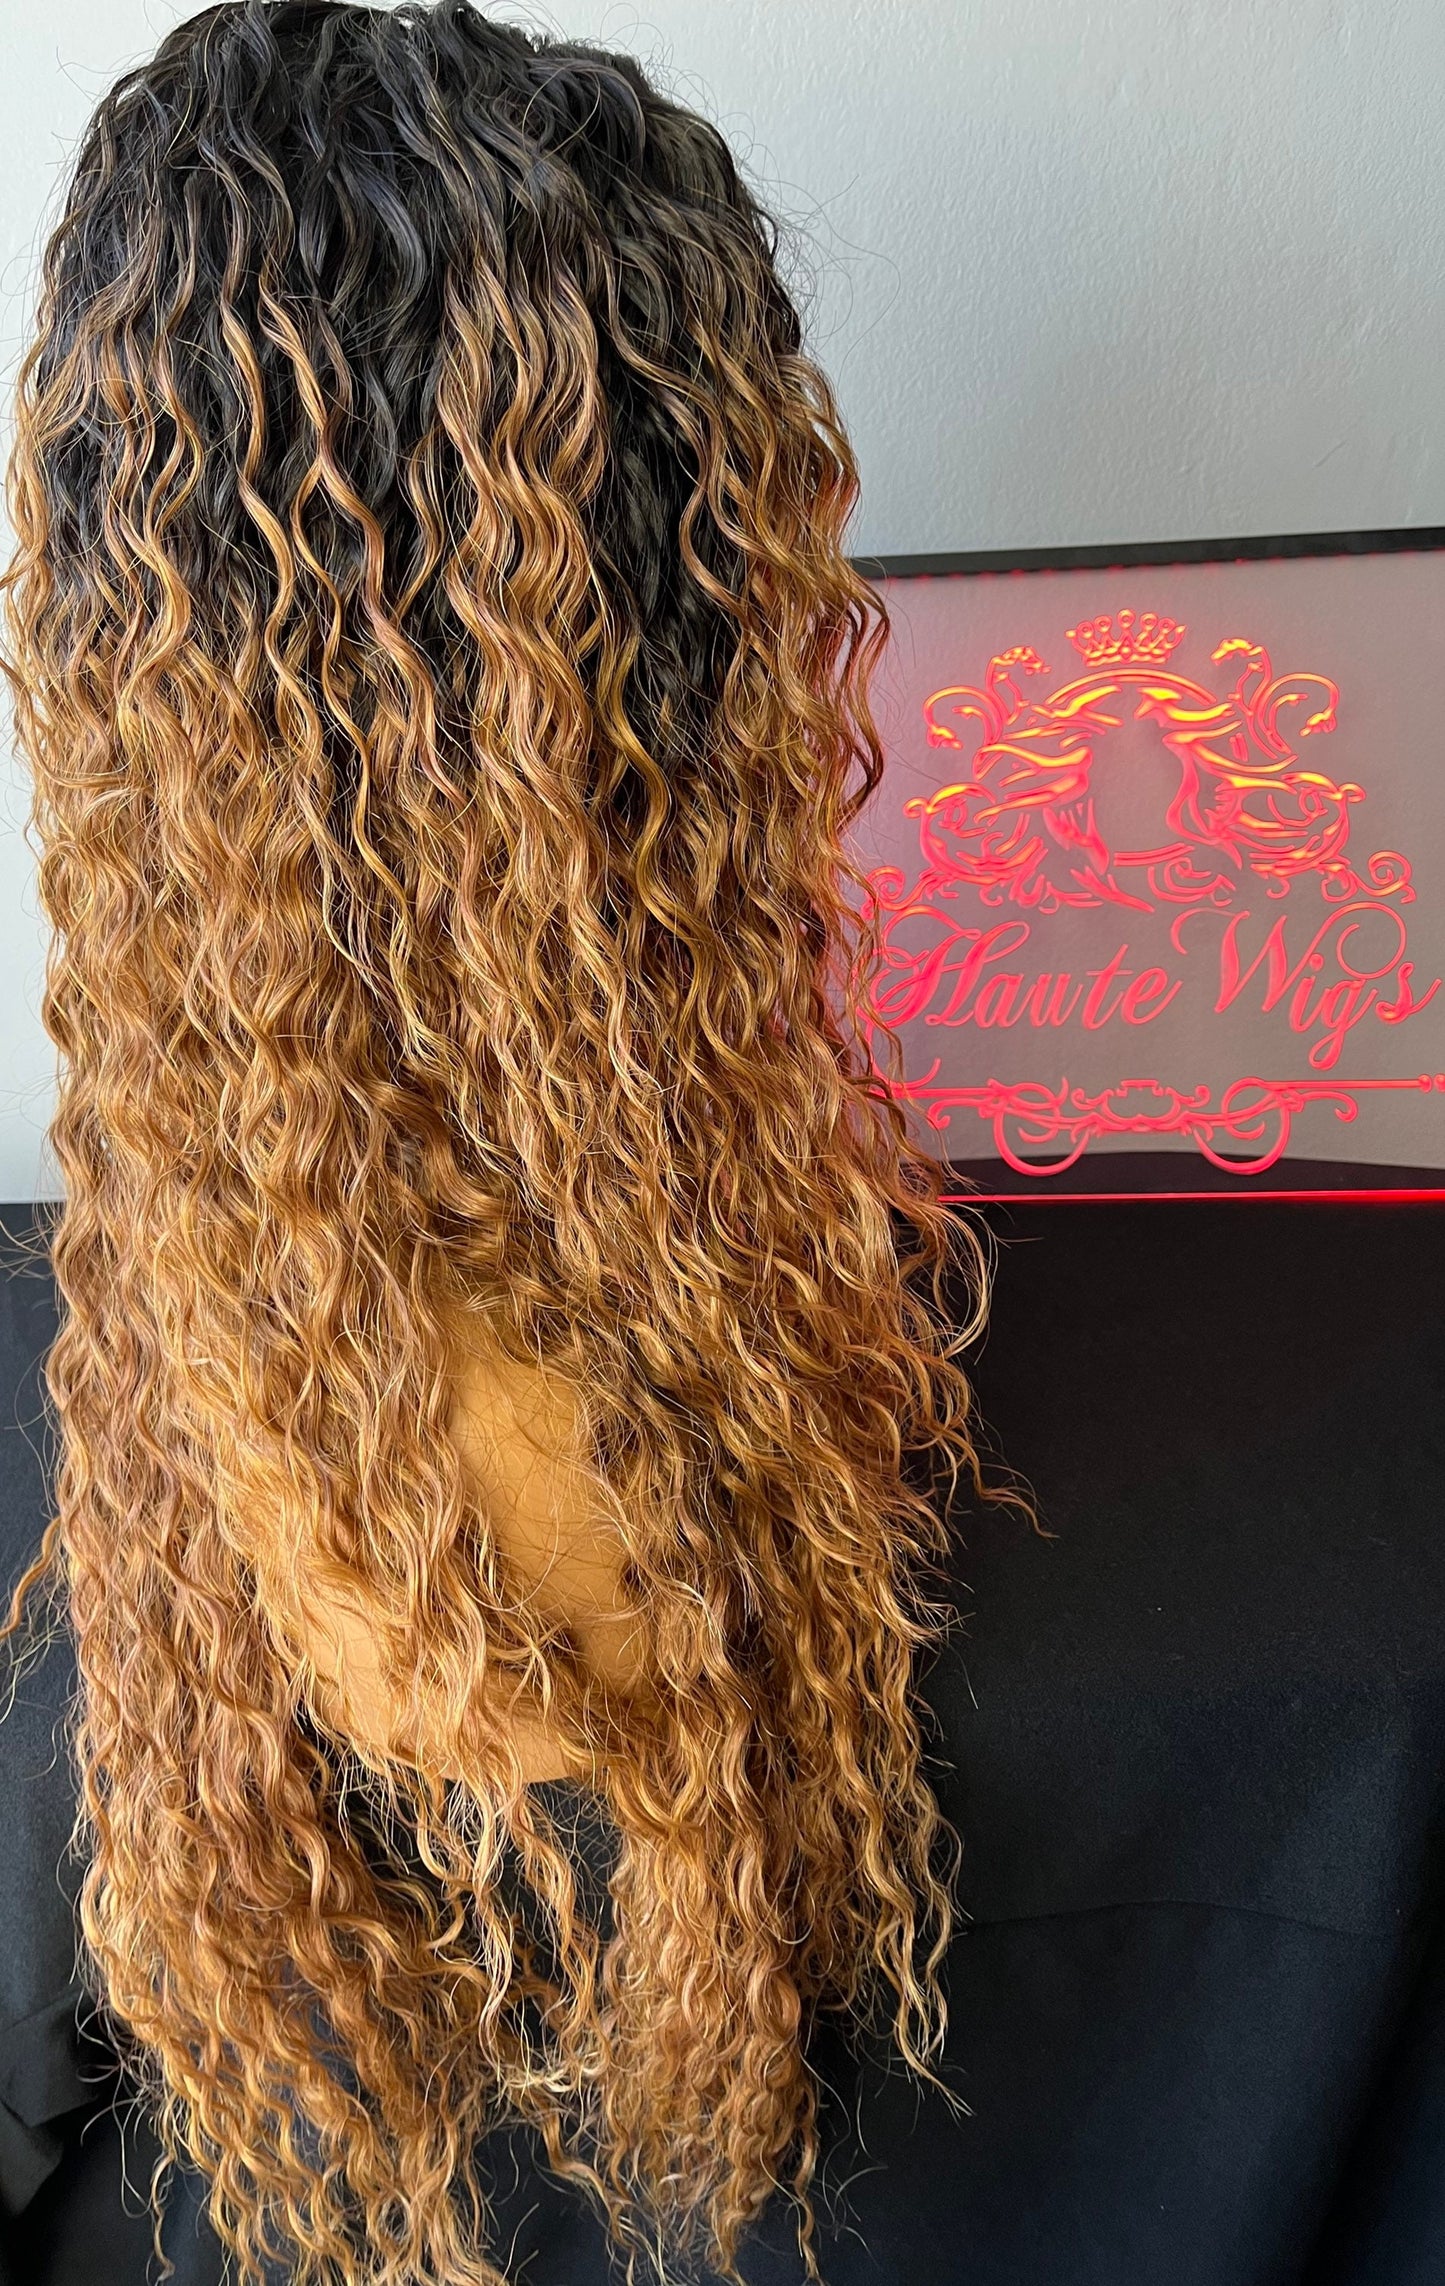 WET Look Jerry Curl Perm 24 Inch Blonde Light Golden Brown Ombre Wig W Bangs Fringe No Lace Front Human Hair Synthetic Blends Extra CURLY